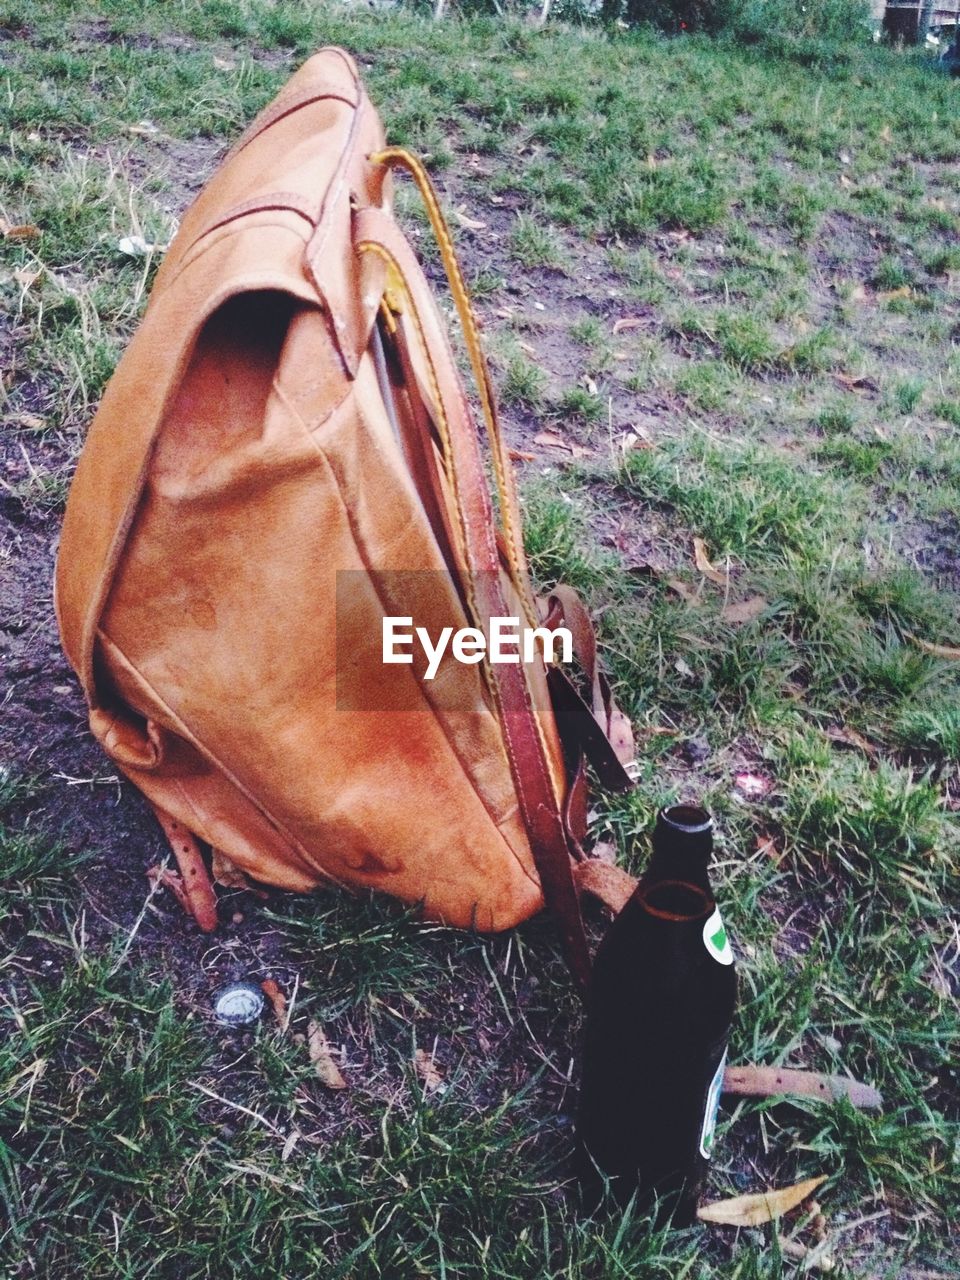 Leather backpack and beer bottle on field